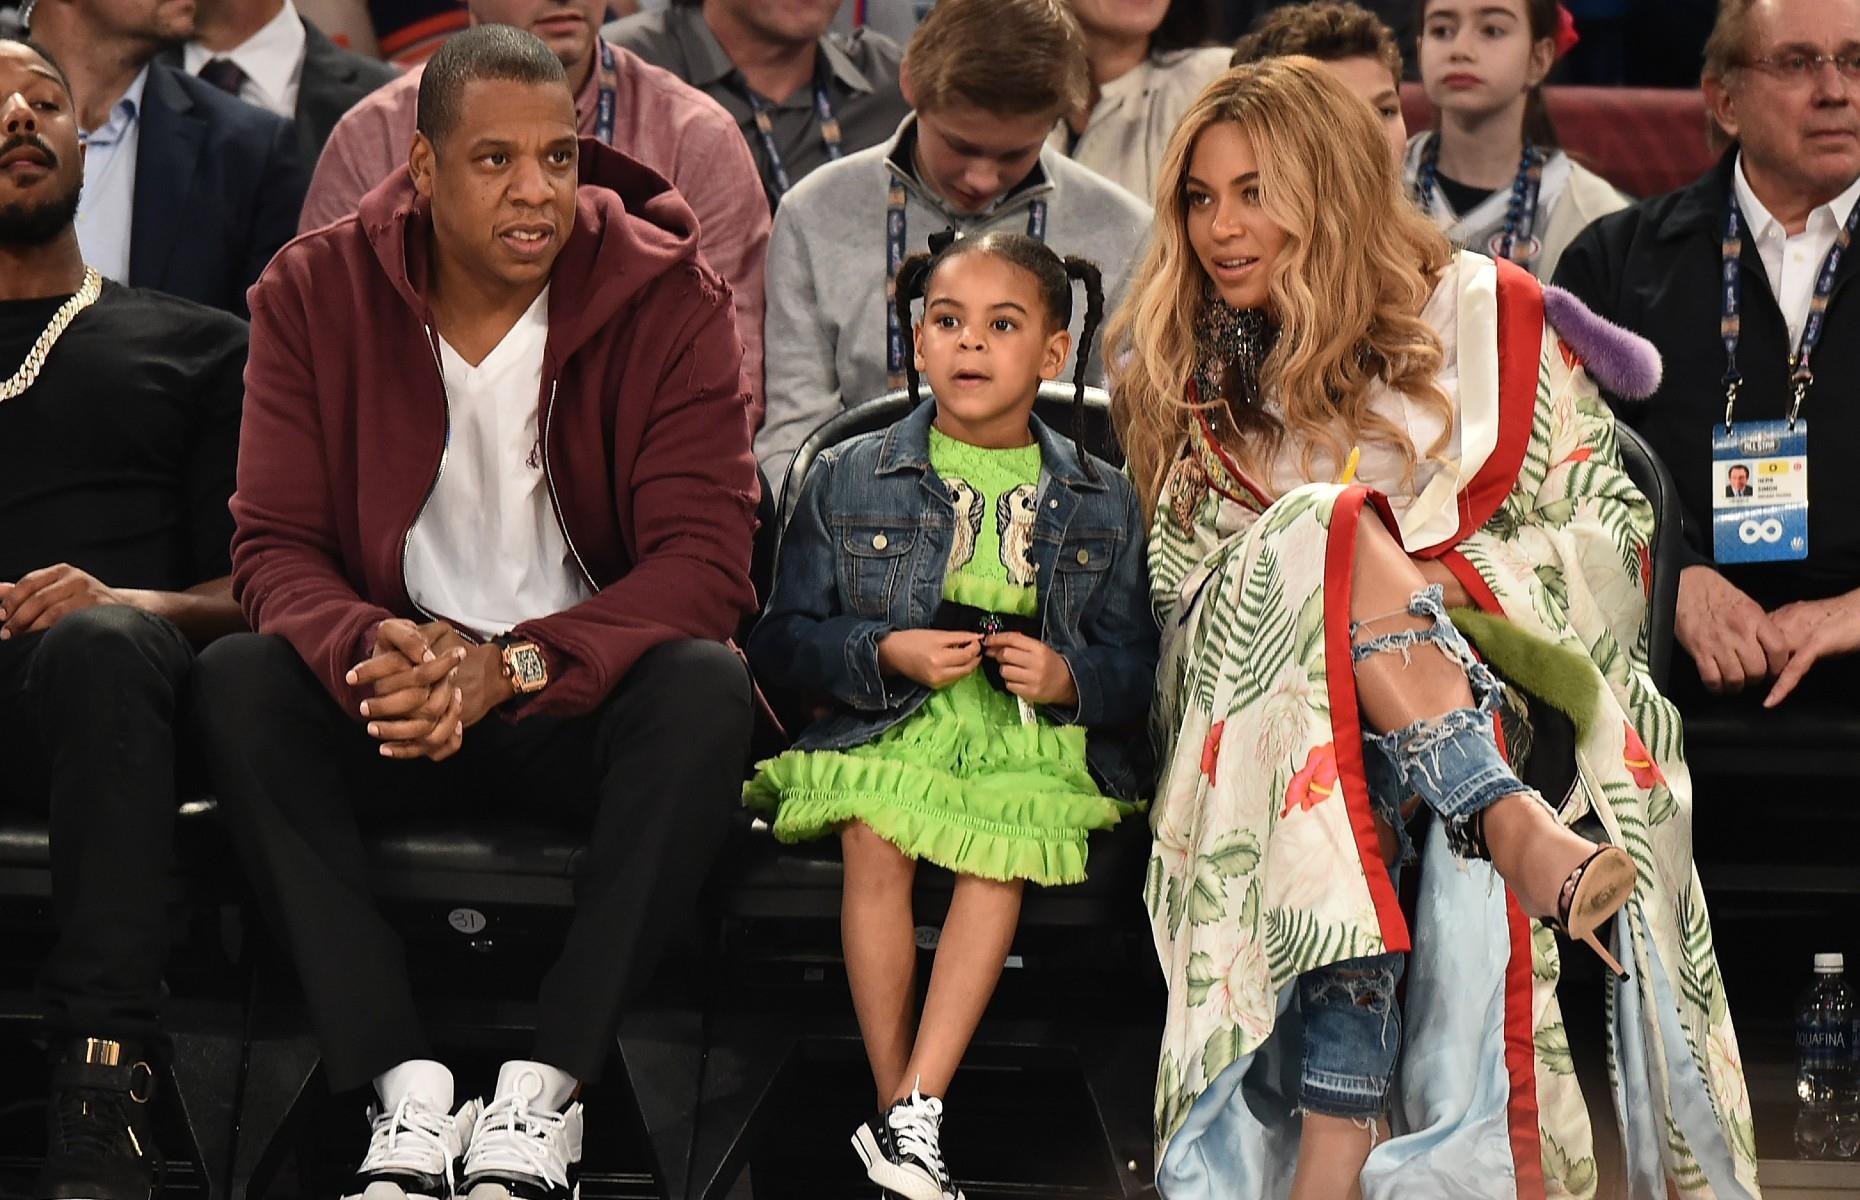 <p>The couple spends a large chunk of their fortune on their children. Beyoncé gifted her eldest daughter an $80,000 diamond-encrusted Barbie doll for her birthday. She and Jay-Z also splurged on matching gold cribs for the twins costing $75,000. All three children are often spotted wearing costly designer clothes and Blue Ivy was even pictured wearing a $5,000 dress by popular fashion designer Mischka Aoki.</p>